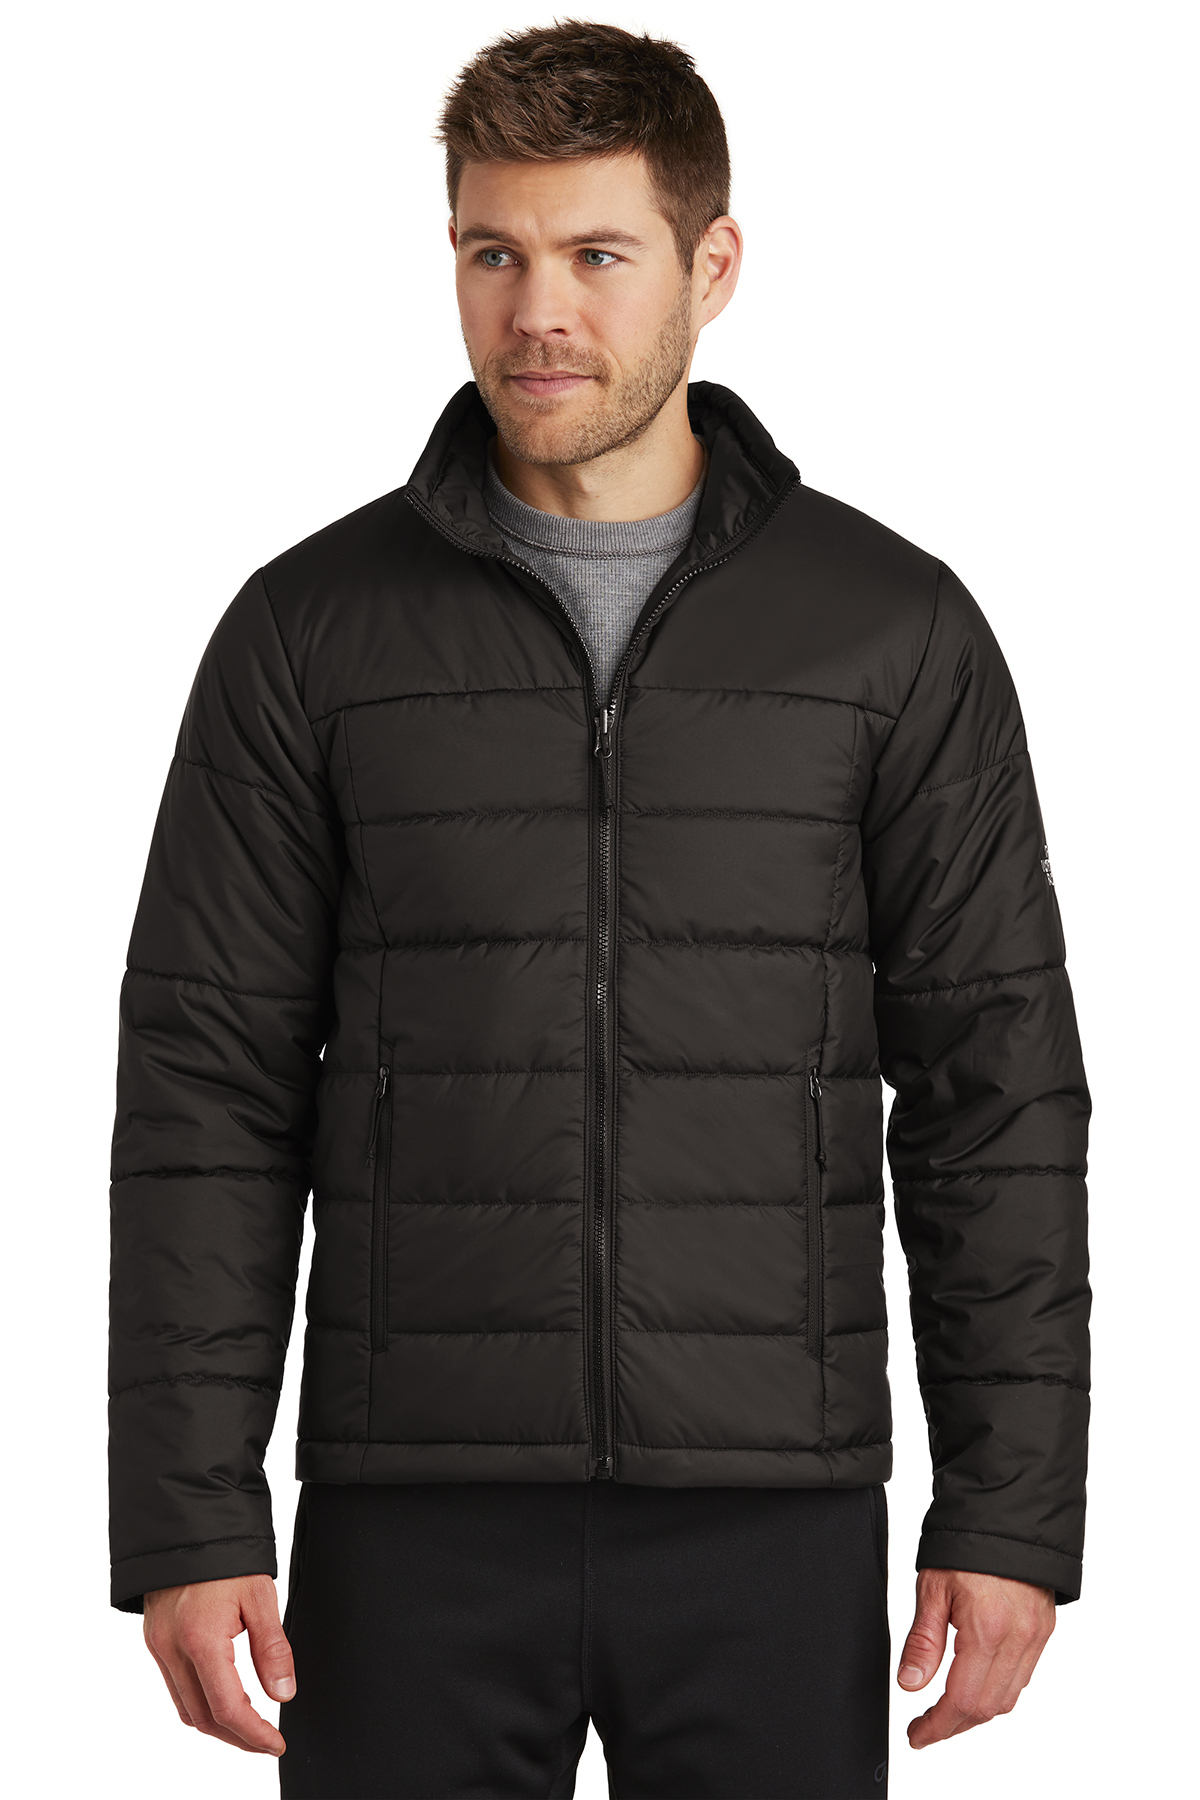 The North Face Traverse Triclimate 3-in-1 Jacket | Product | SanMar